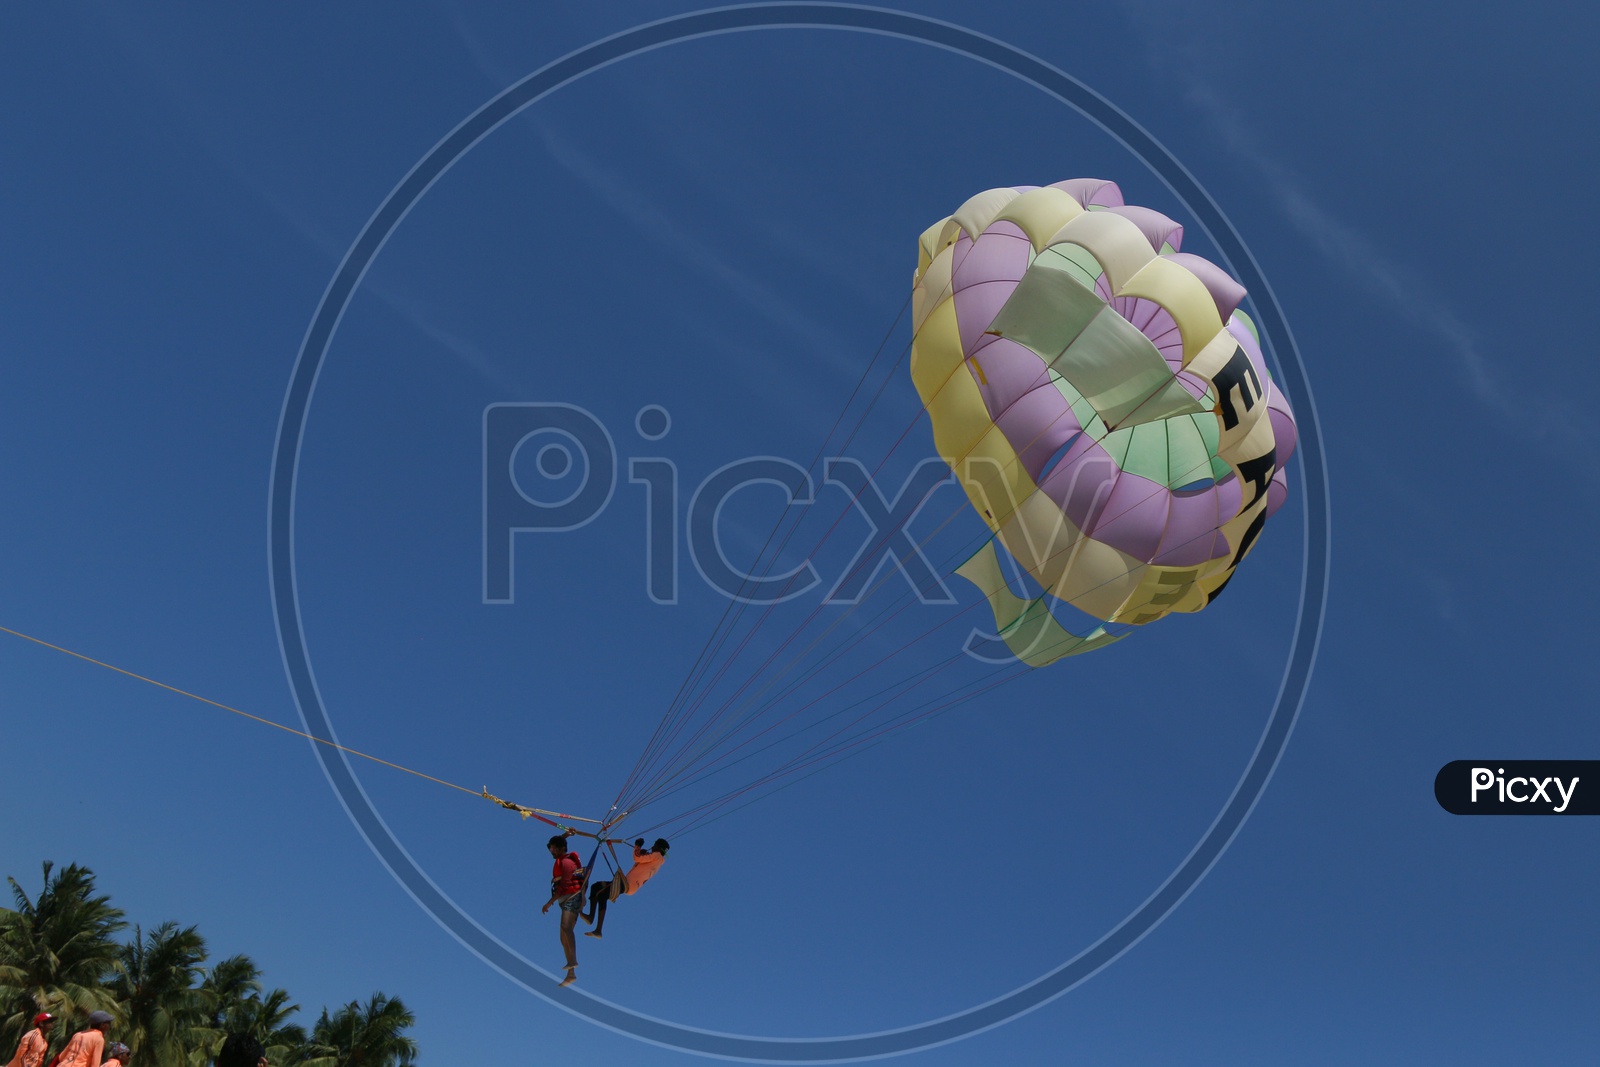 Two ParaGliders Tandem Flying against a Blue Sky